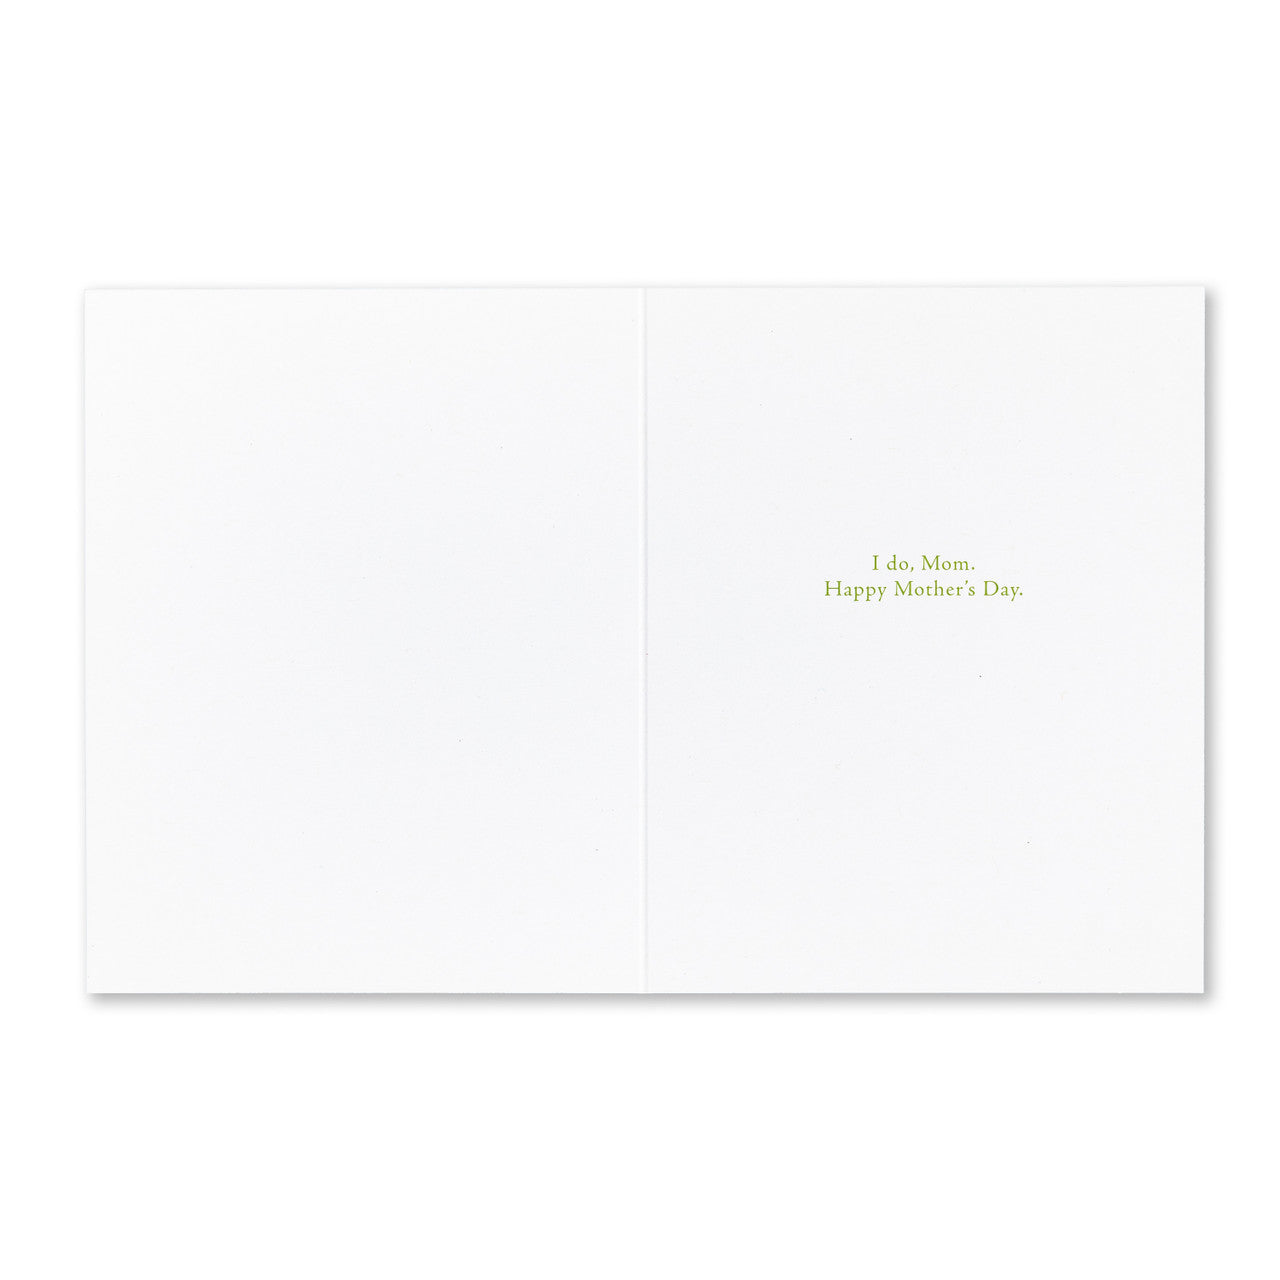 Mother's Day Card - “…I SHALL THINK OF YOU… WHENEVER I SEE A BEAUTIFUL THING.”